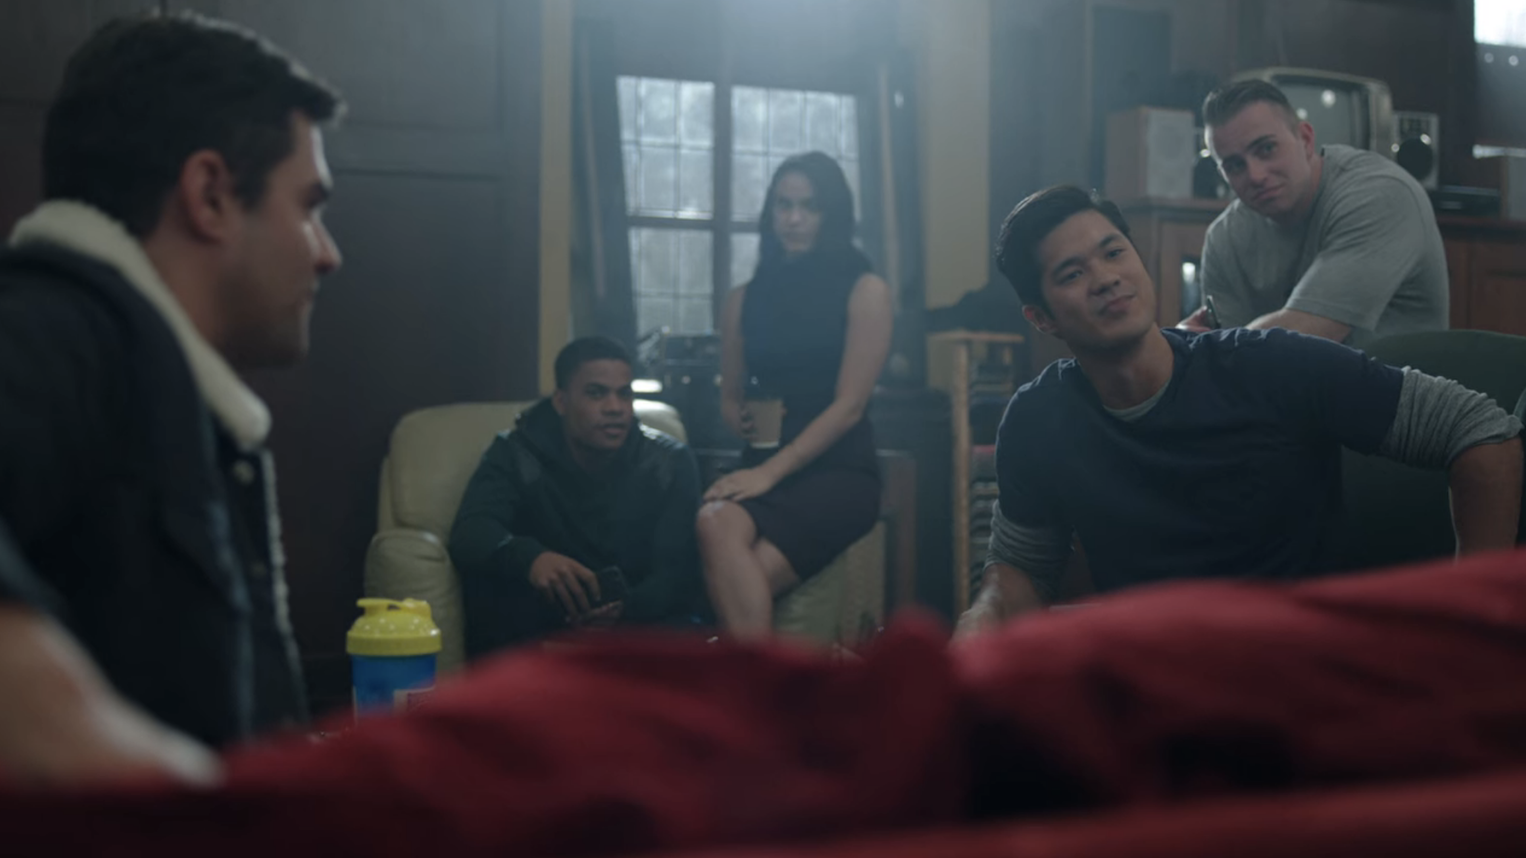 Reggie makes fun of Jughead while other students look on